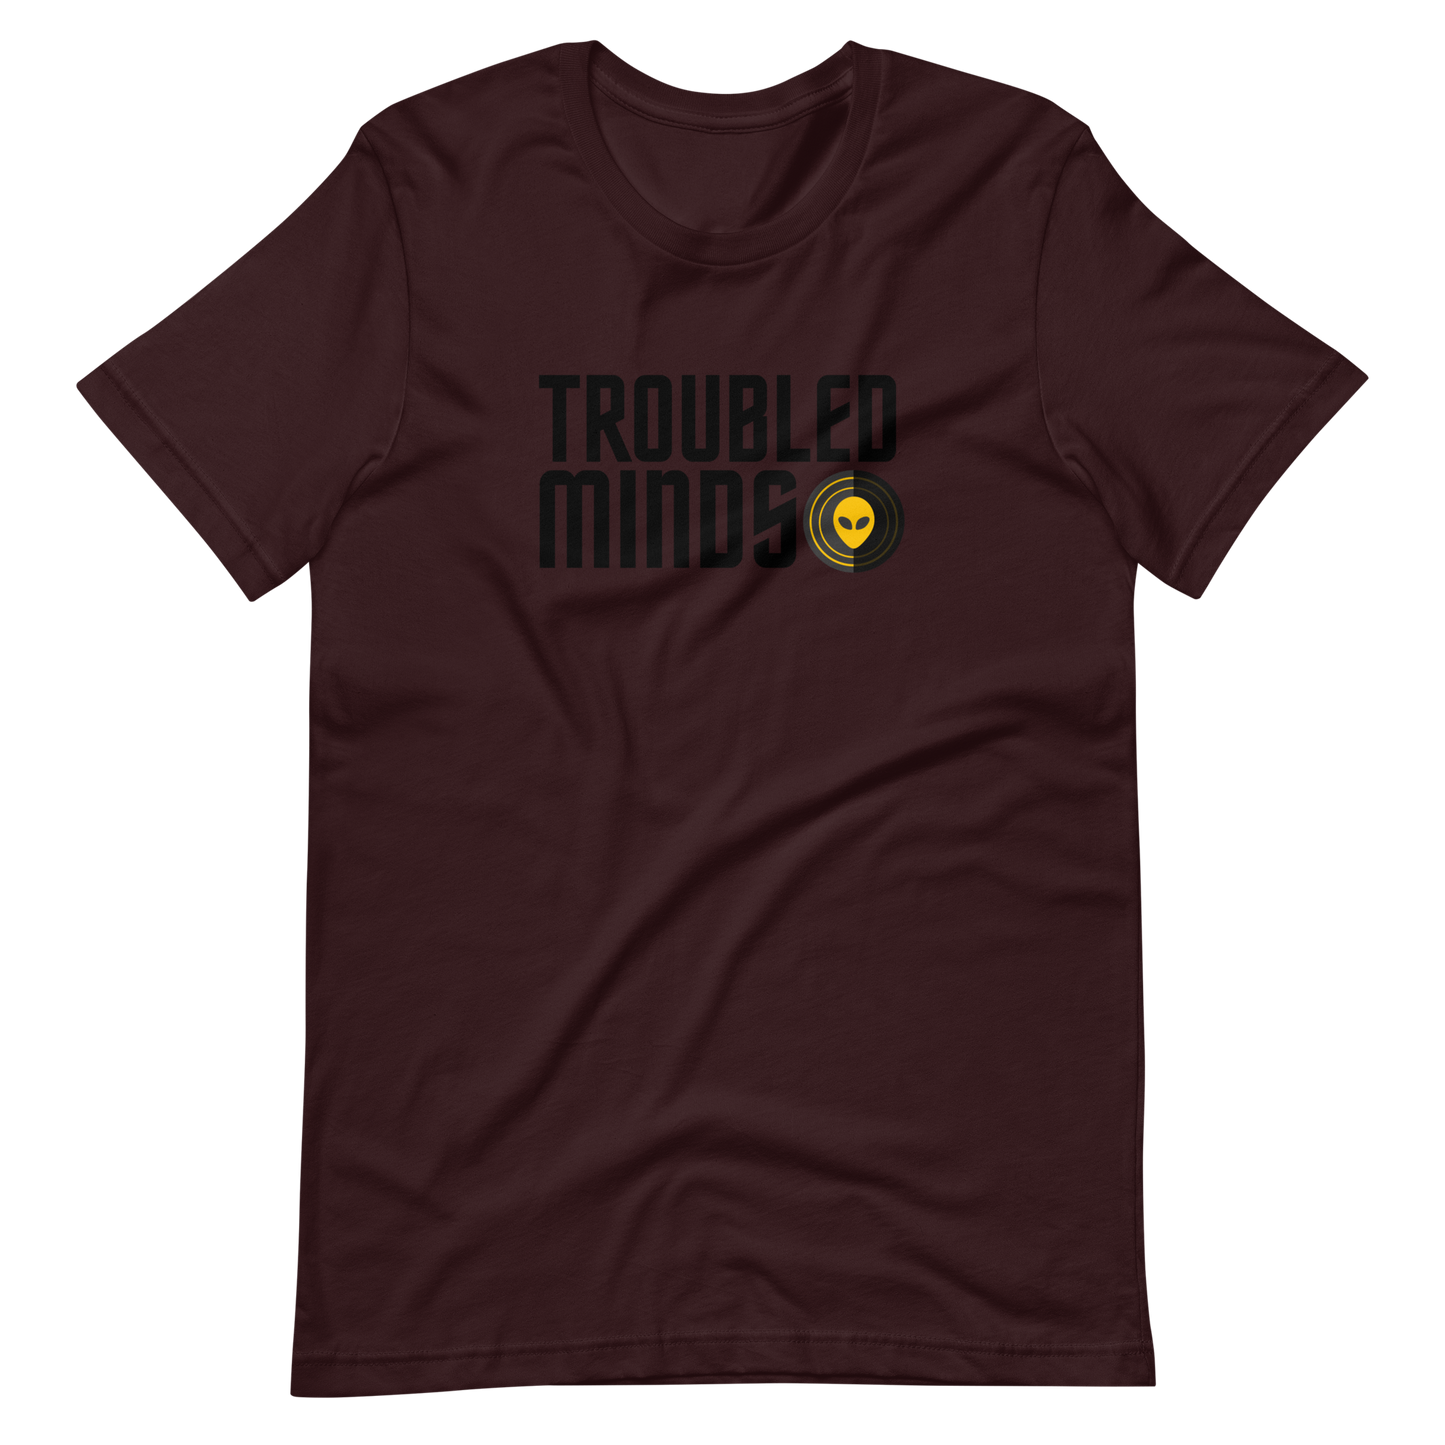 Troubled Minds T-Shirt - (BLK/YLW Logo)